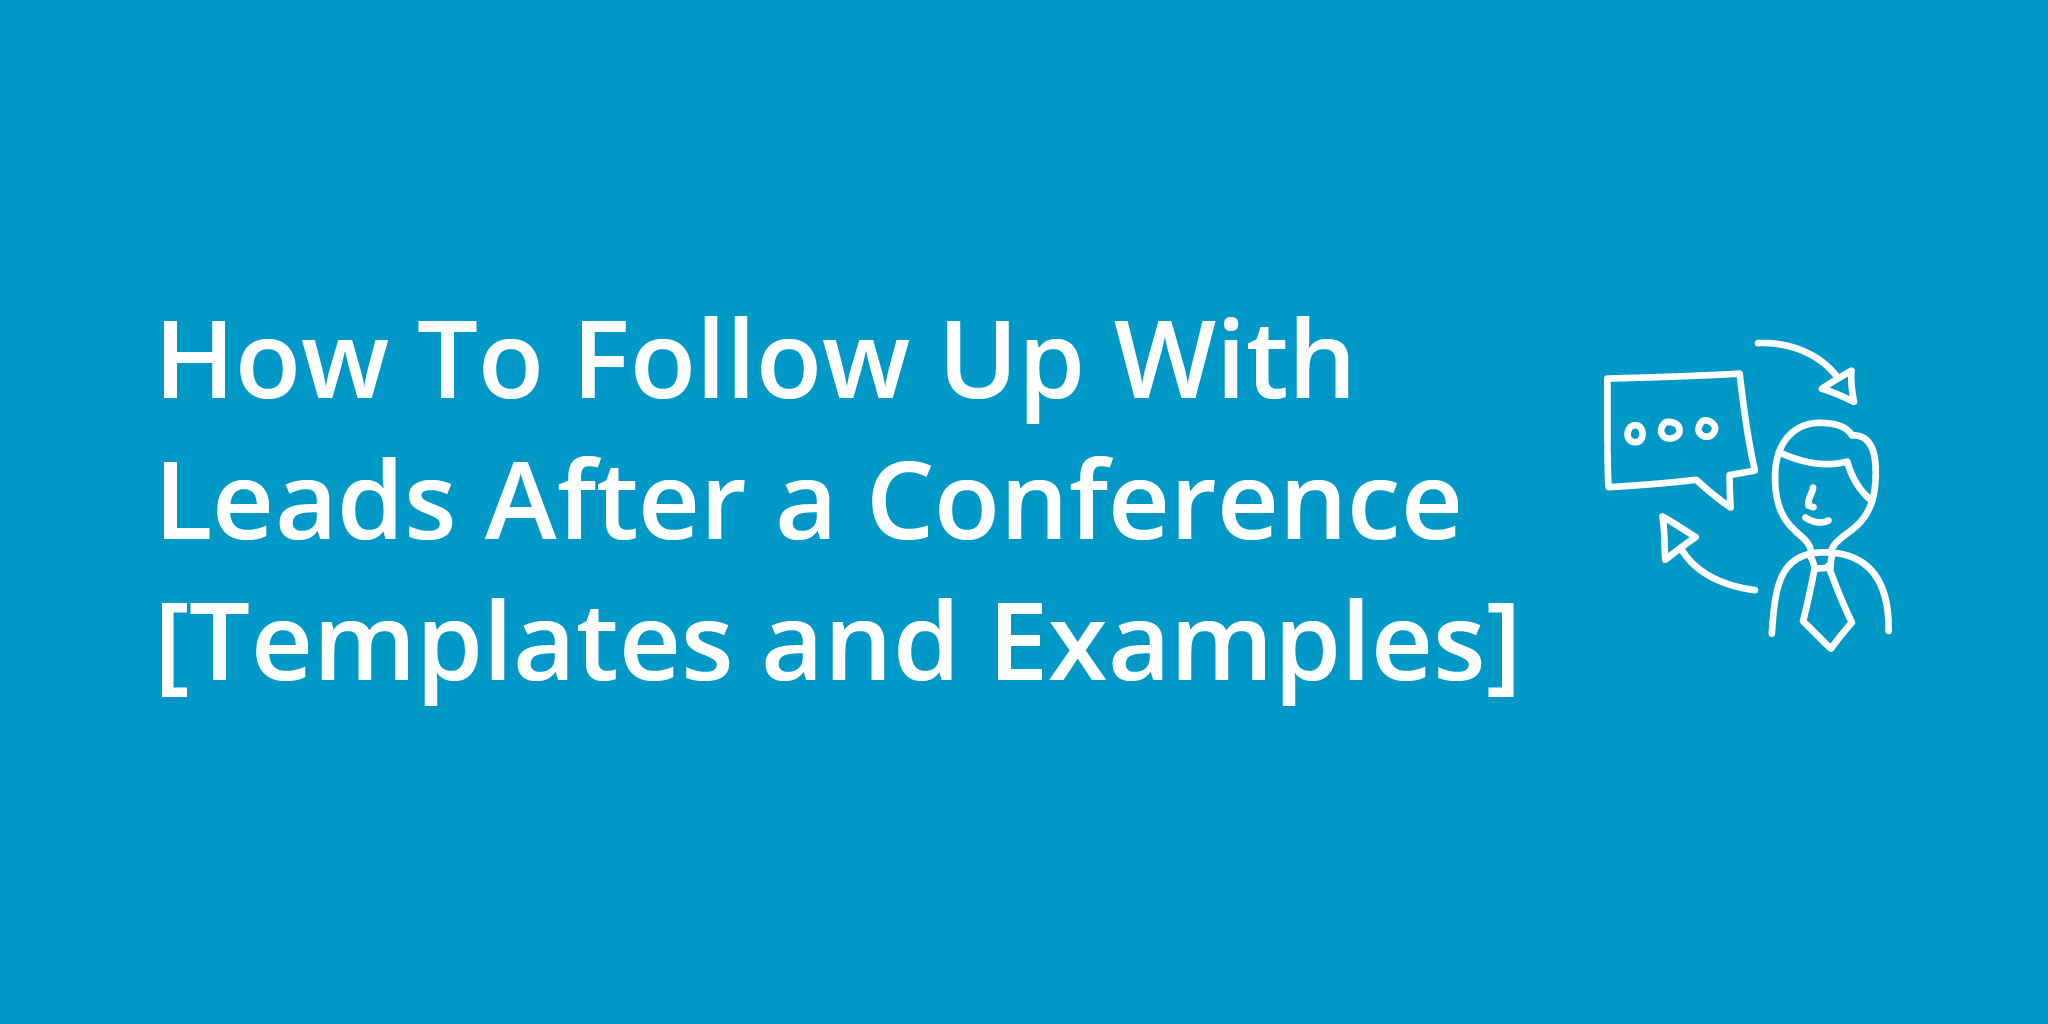 How To Follow Up With Leads After a Conference [Templates and Examples] | Telephones for business